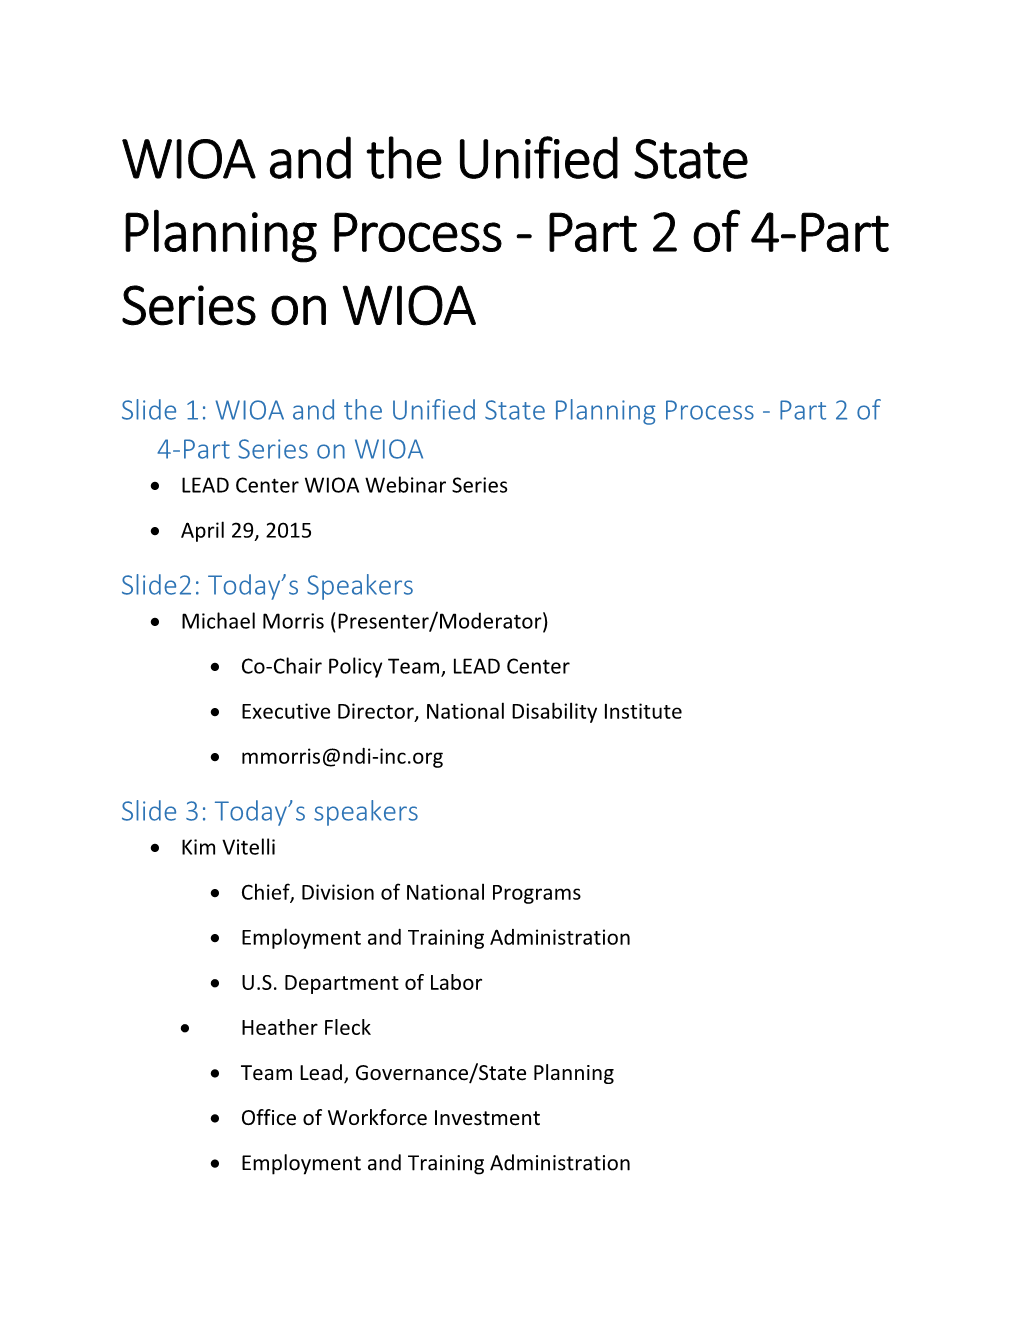 WIOA and the Unified State Planning Process - Part 2 of 4-Part Series on WIOA